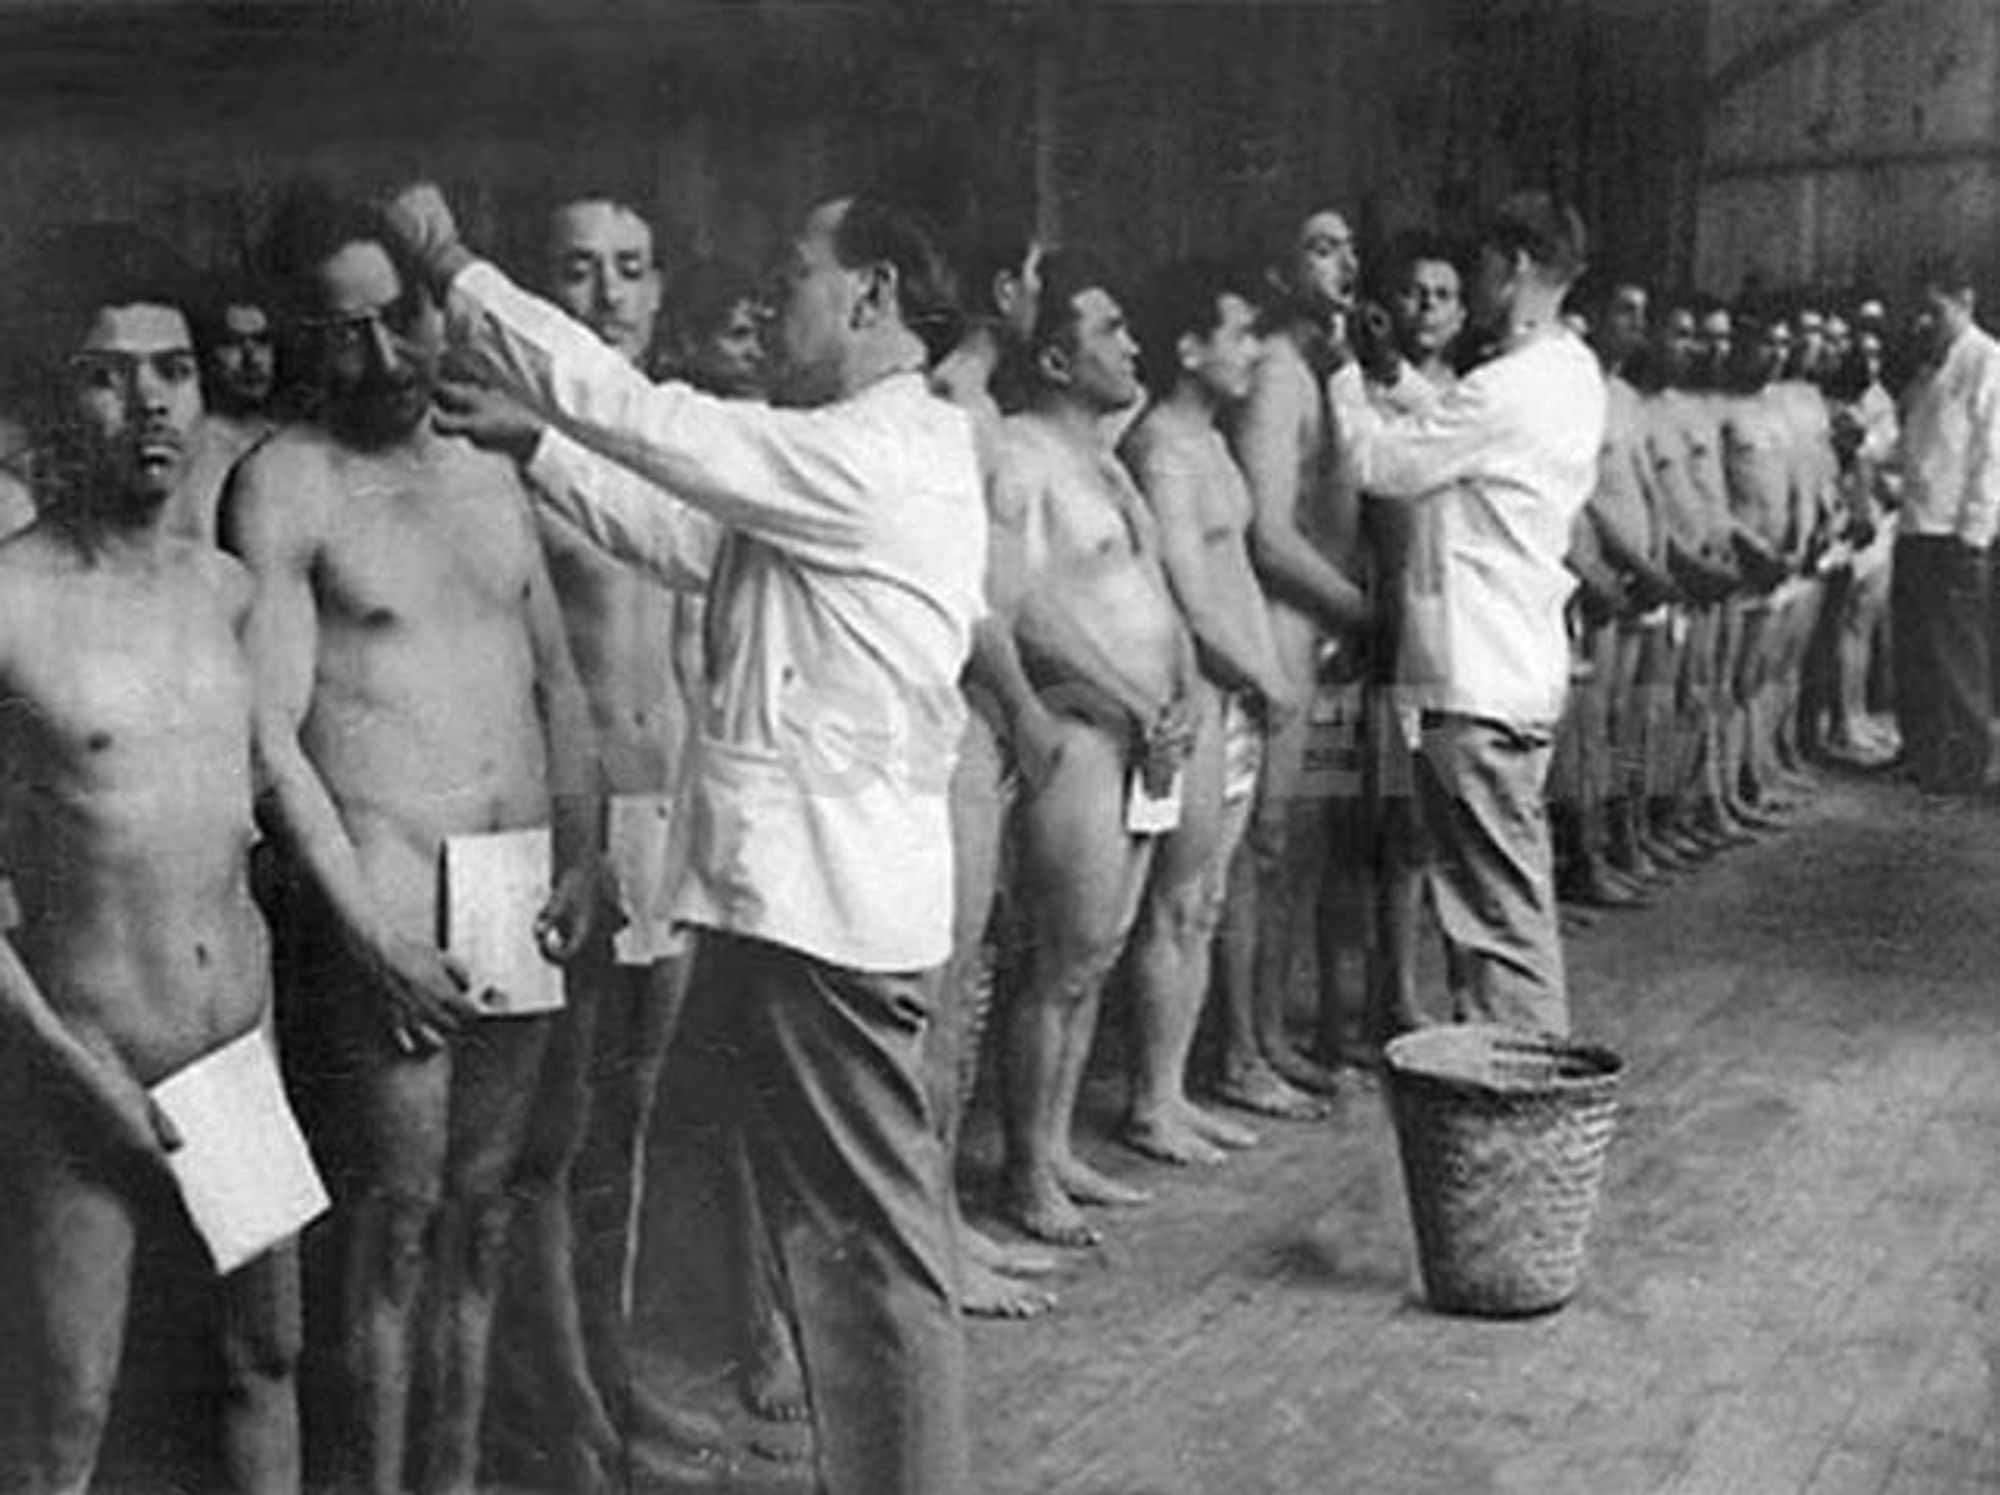 Mexican male workers in the Bracero Program being doused with chemicals while undergoing a routine sanitization.